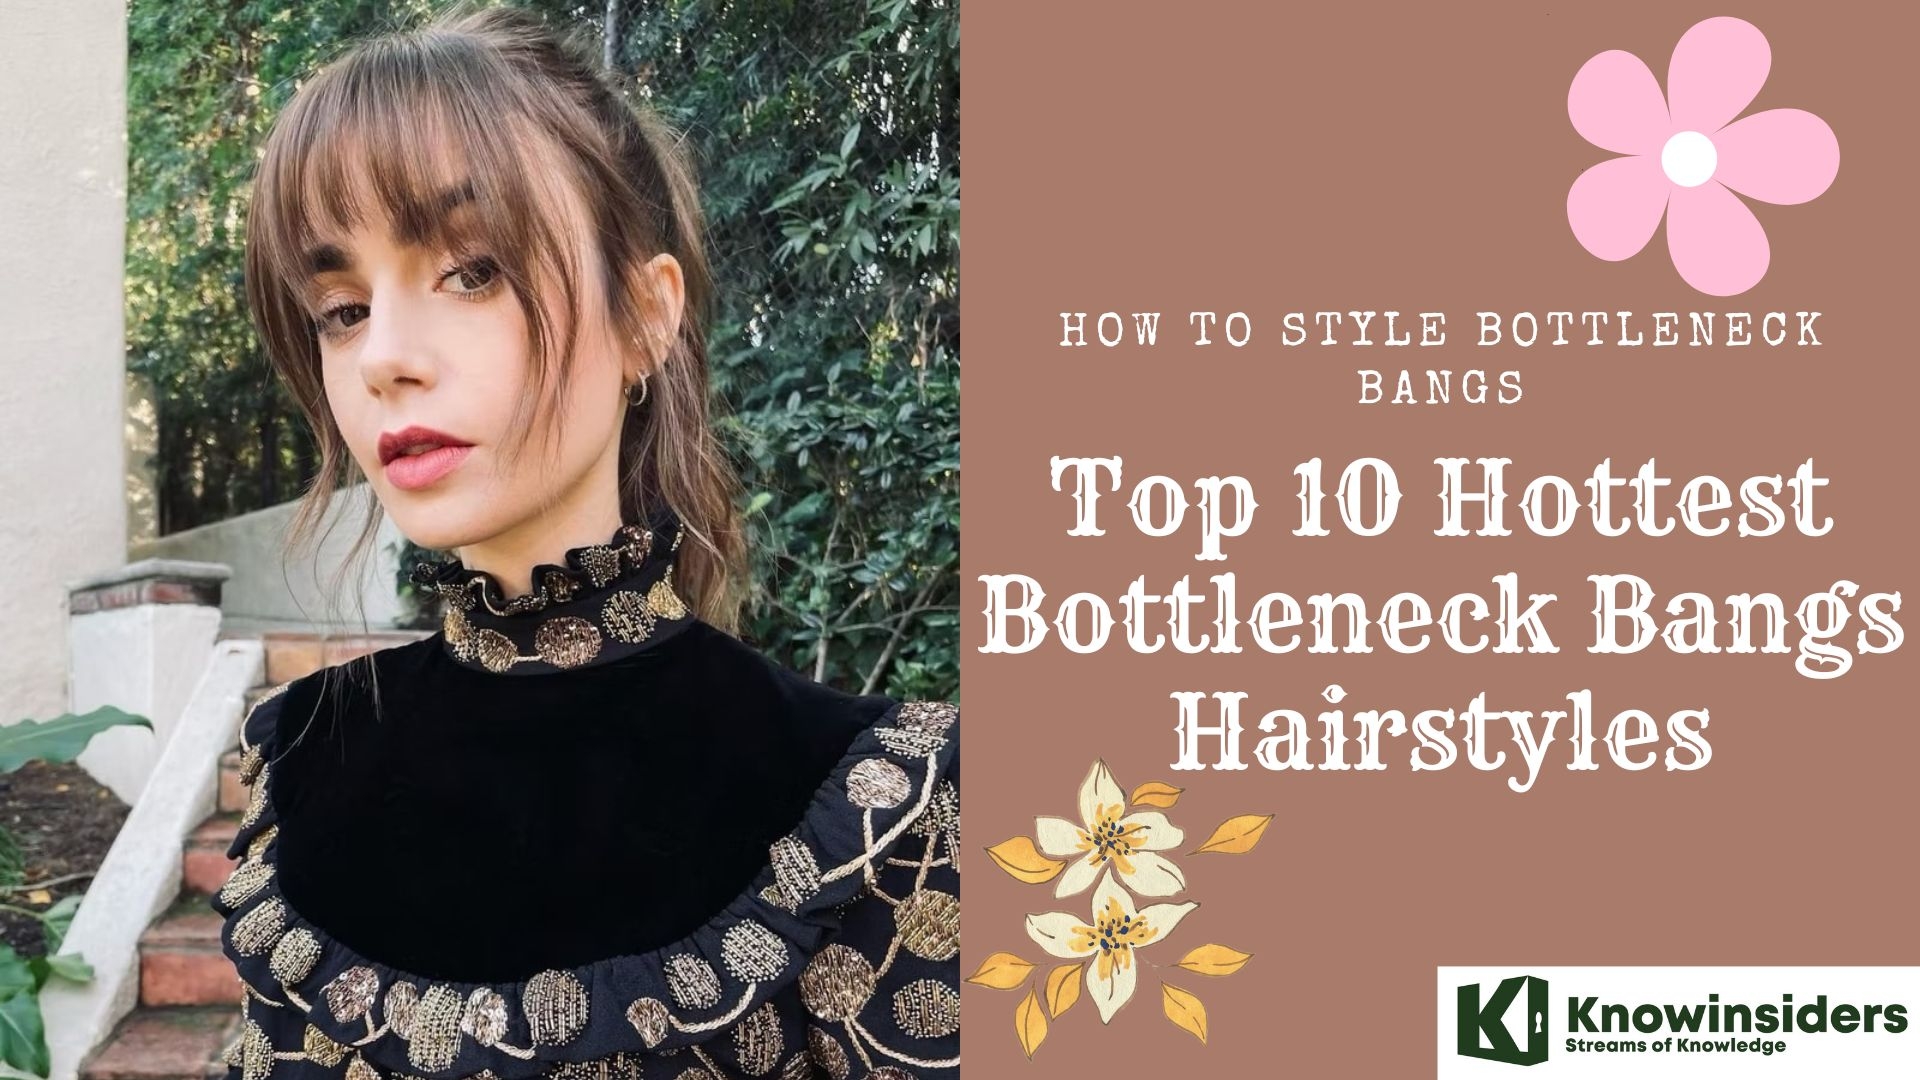 How To Style Bottleneck Bangs Haircut and Top 10 Hottest Hairstyles